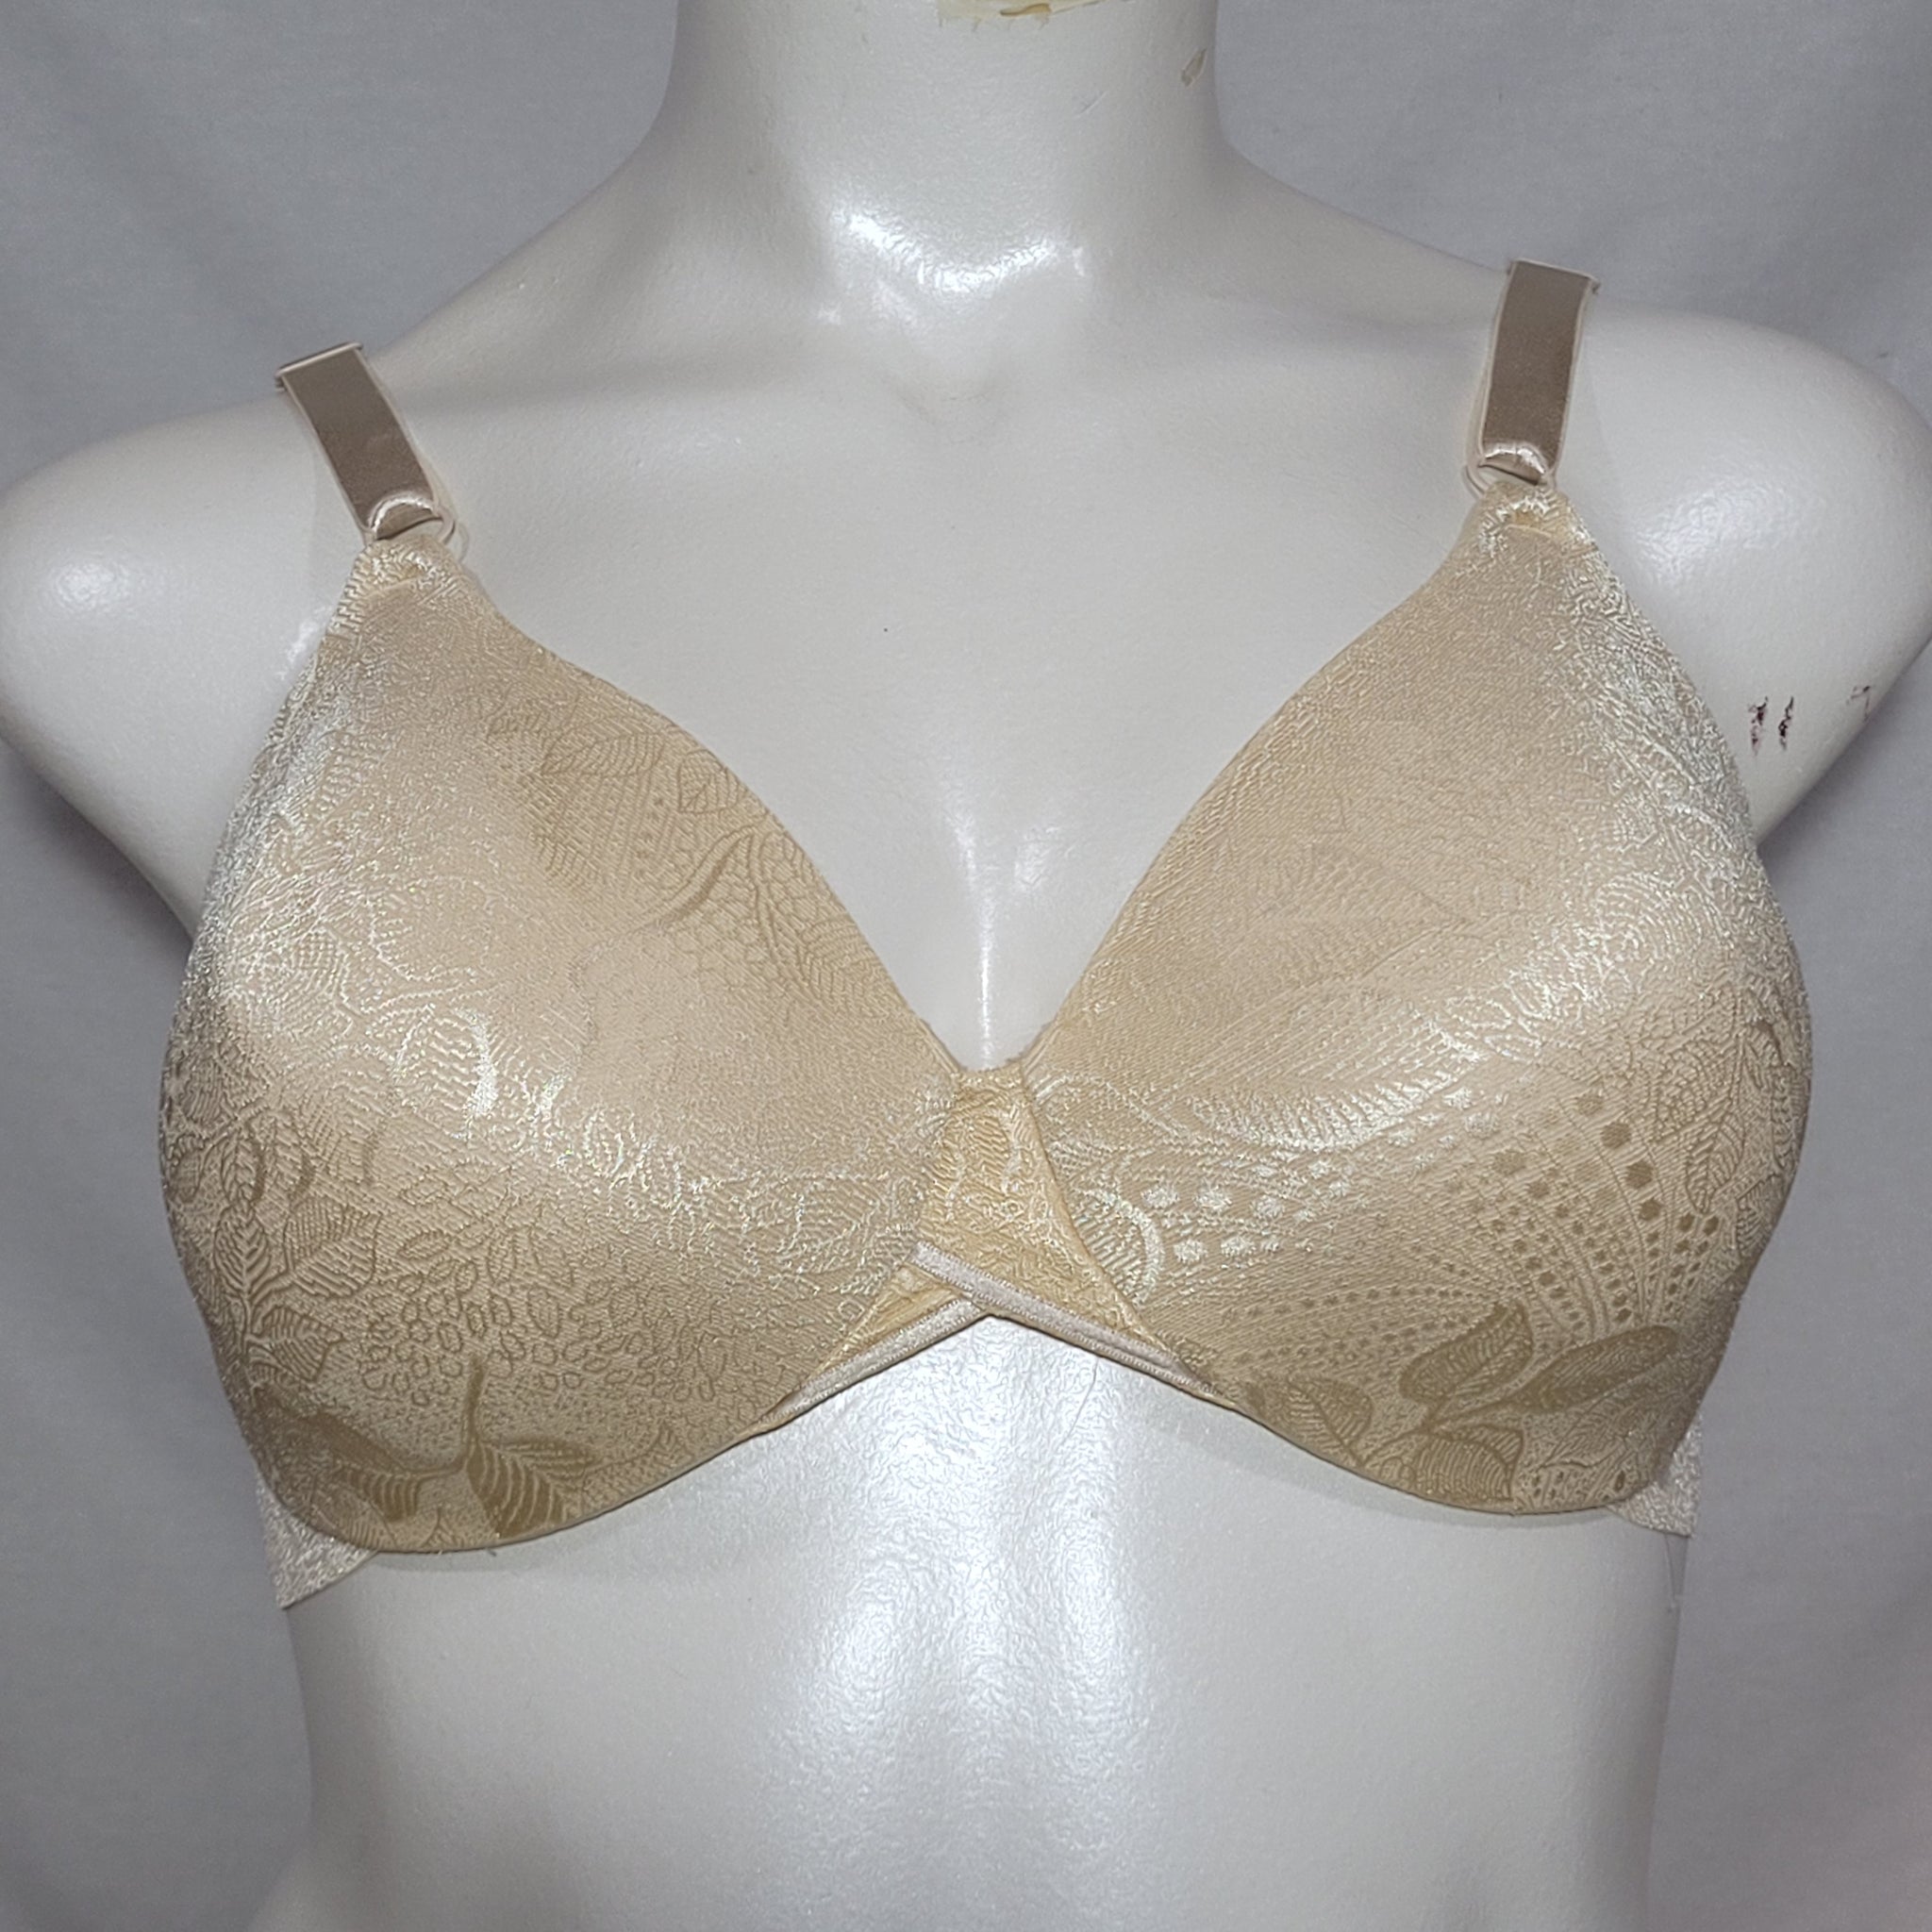 Bali 3235 Concealers Back Smoothing Underwire Bra 38DD Nude